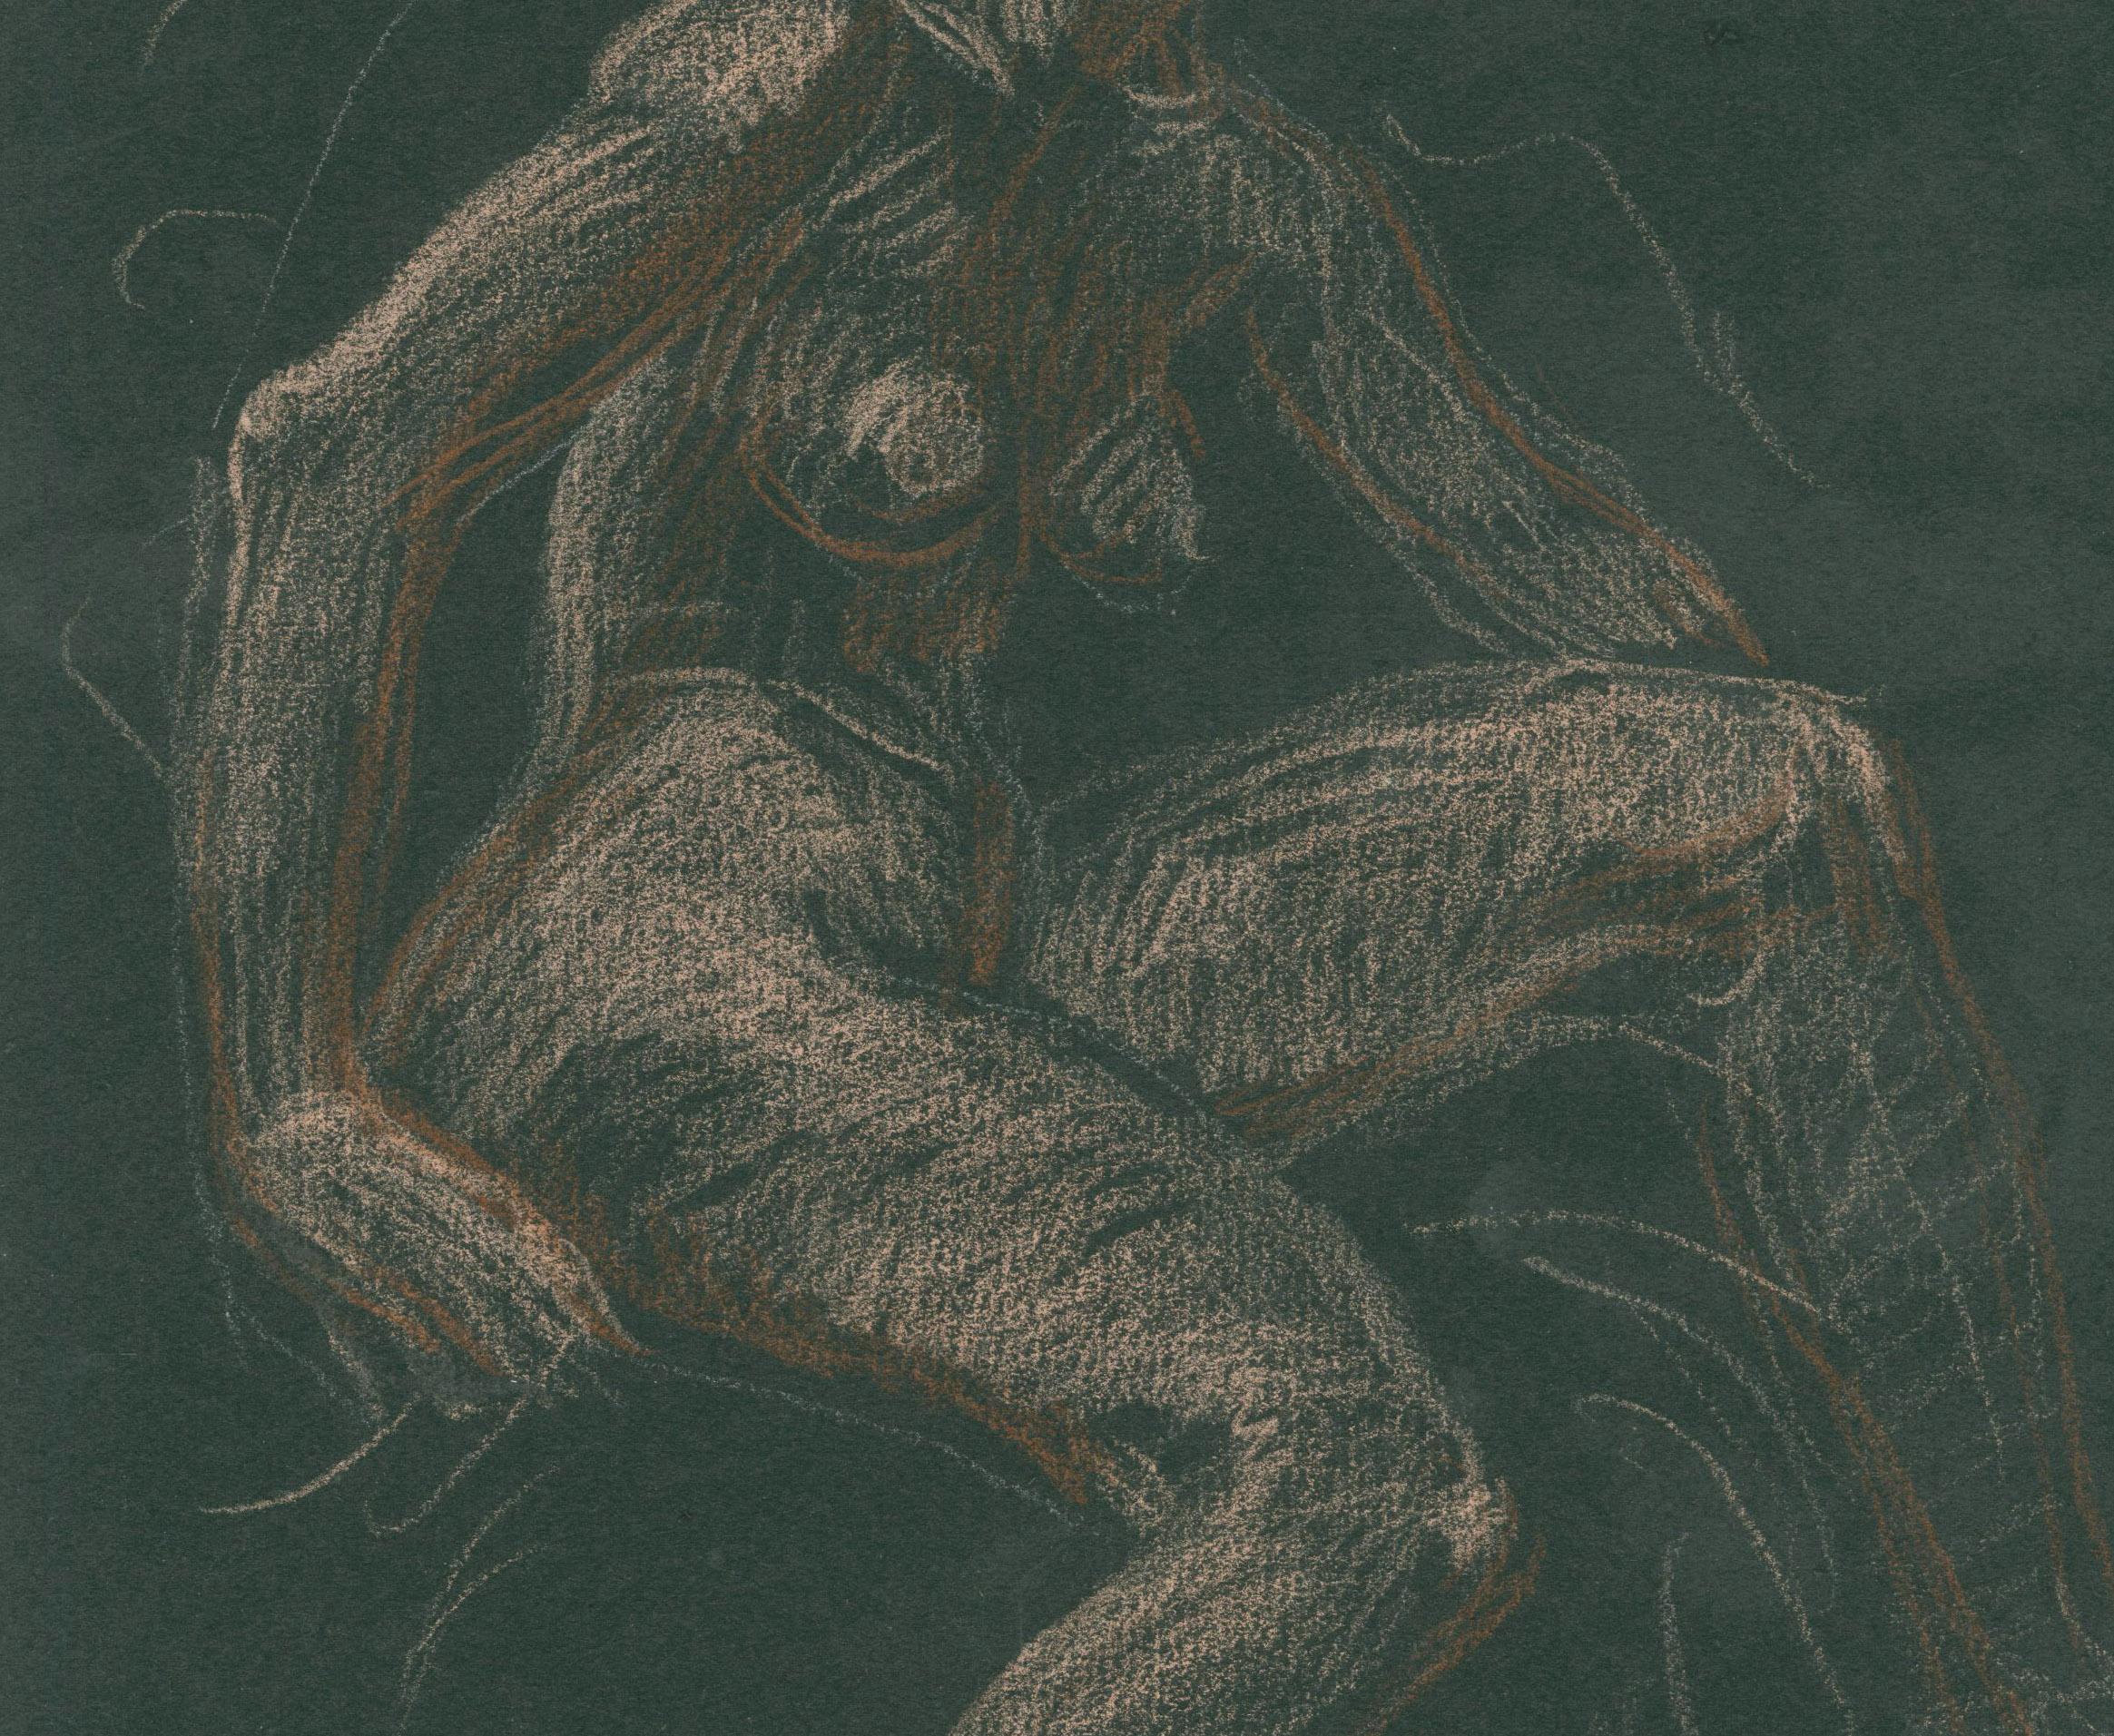 Seated Female Nude
Colored chalks on Black Strathmore paper
c. 1969-1970
Signed upper right corner: Cadmus (see photo)
In 1941, Fidelma Cadmus (Paul’s sister) married Lincoln Kirstein, the co-founder of the New York City Ballet. Lincoln was general